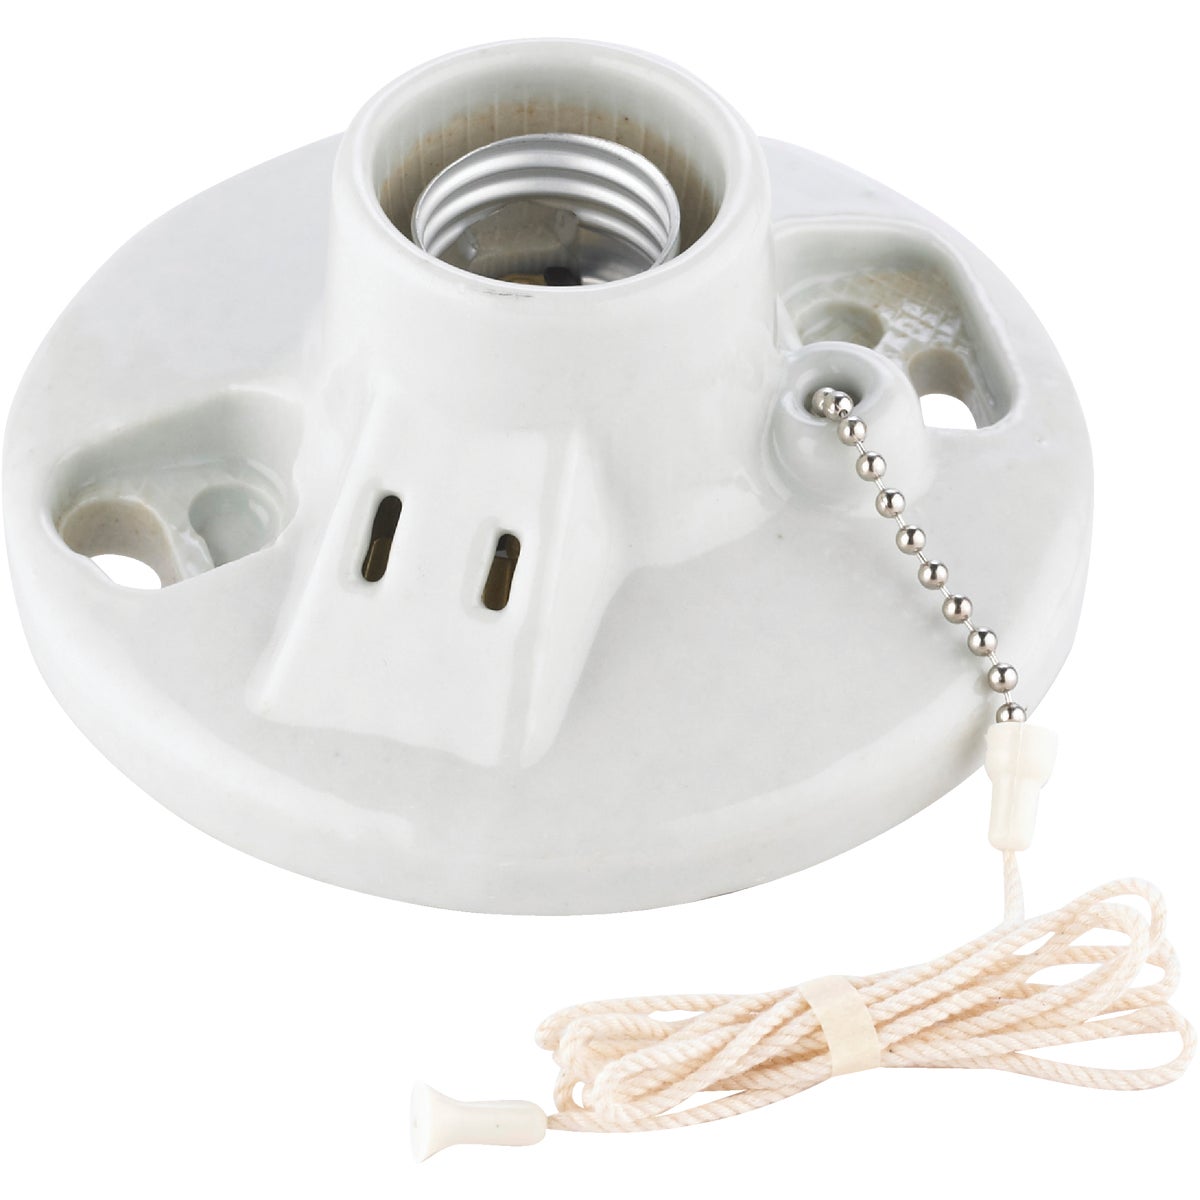 Item 513812, Glazed porcelain lampholder featuring (1) 2-wire outlet with NEMA (National